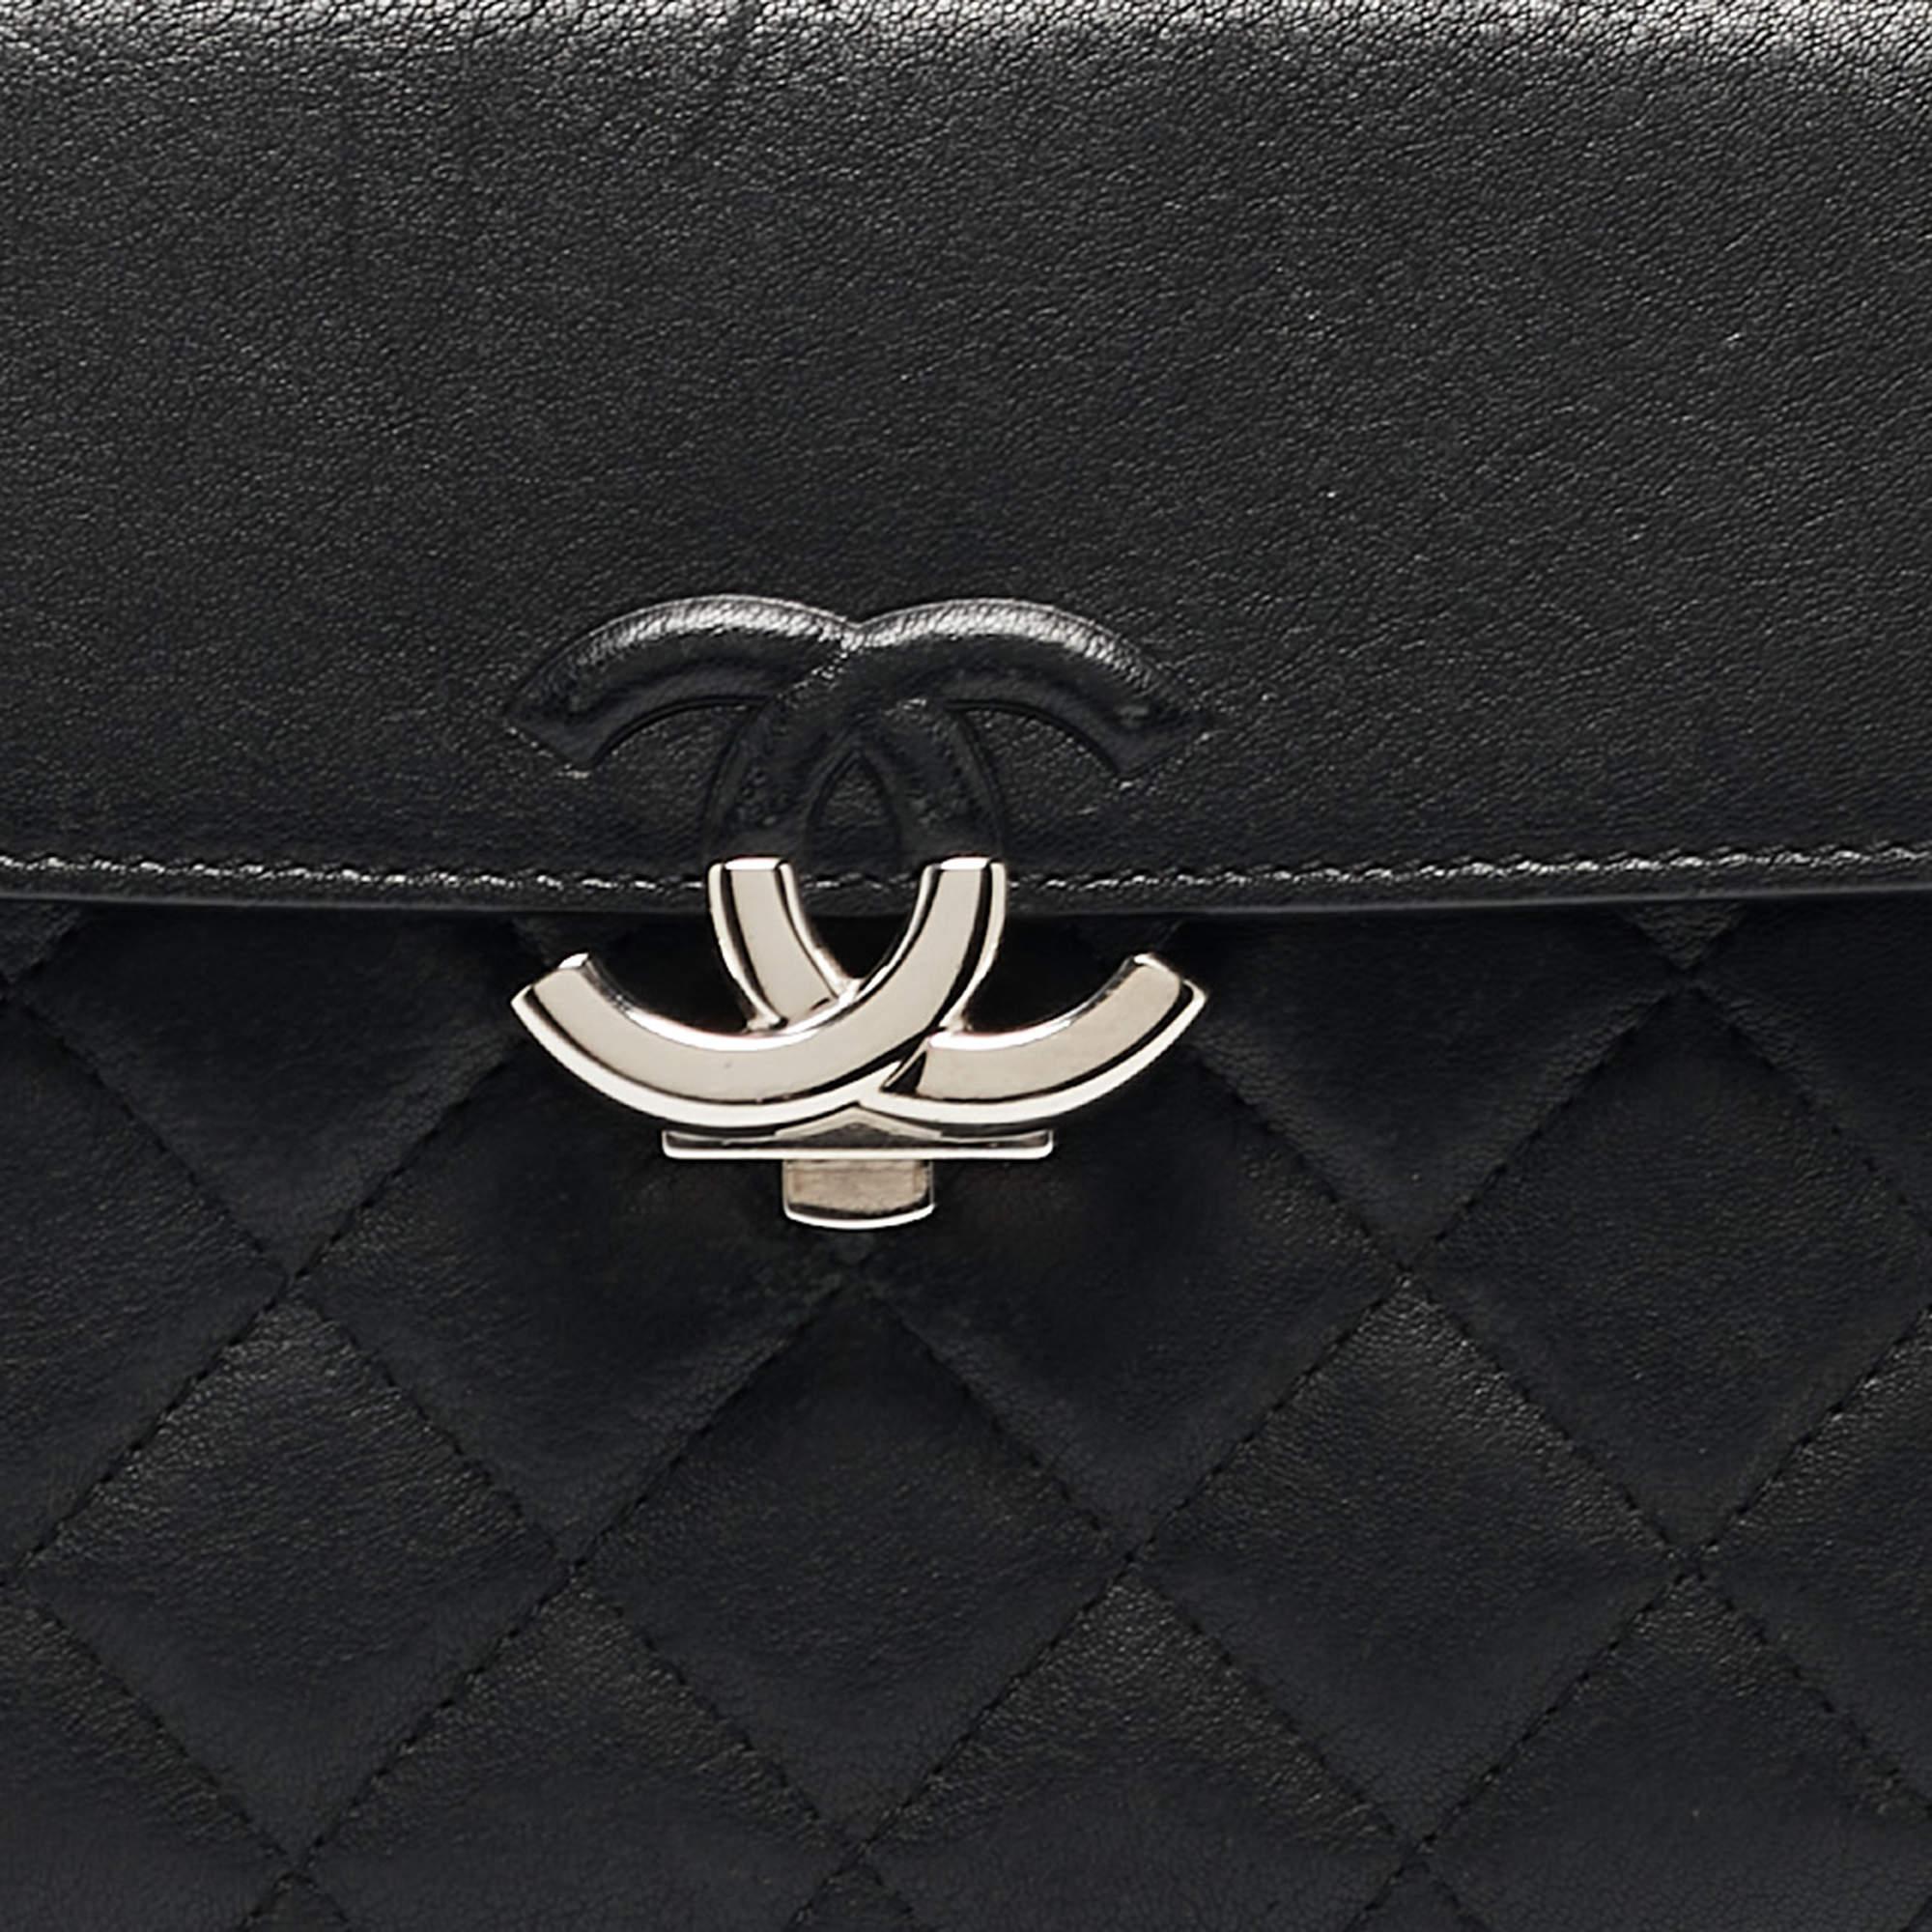 Chanel Black Quilted Leather Small CC Box Flap Bag 7